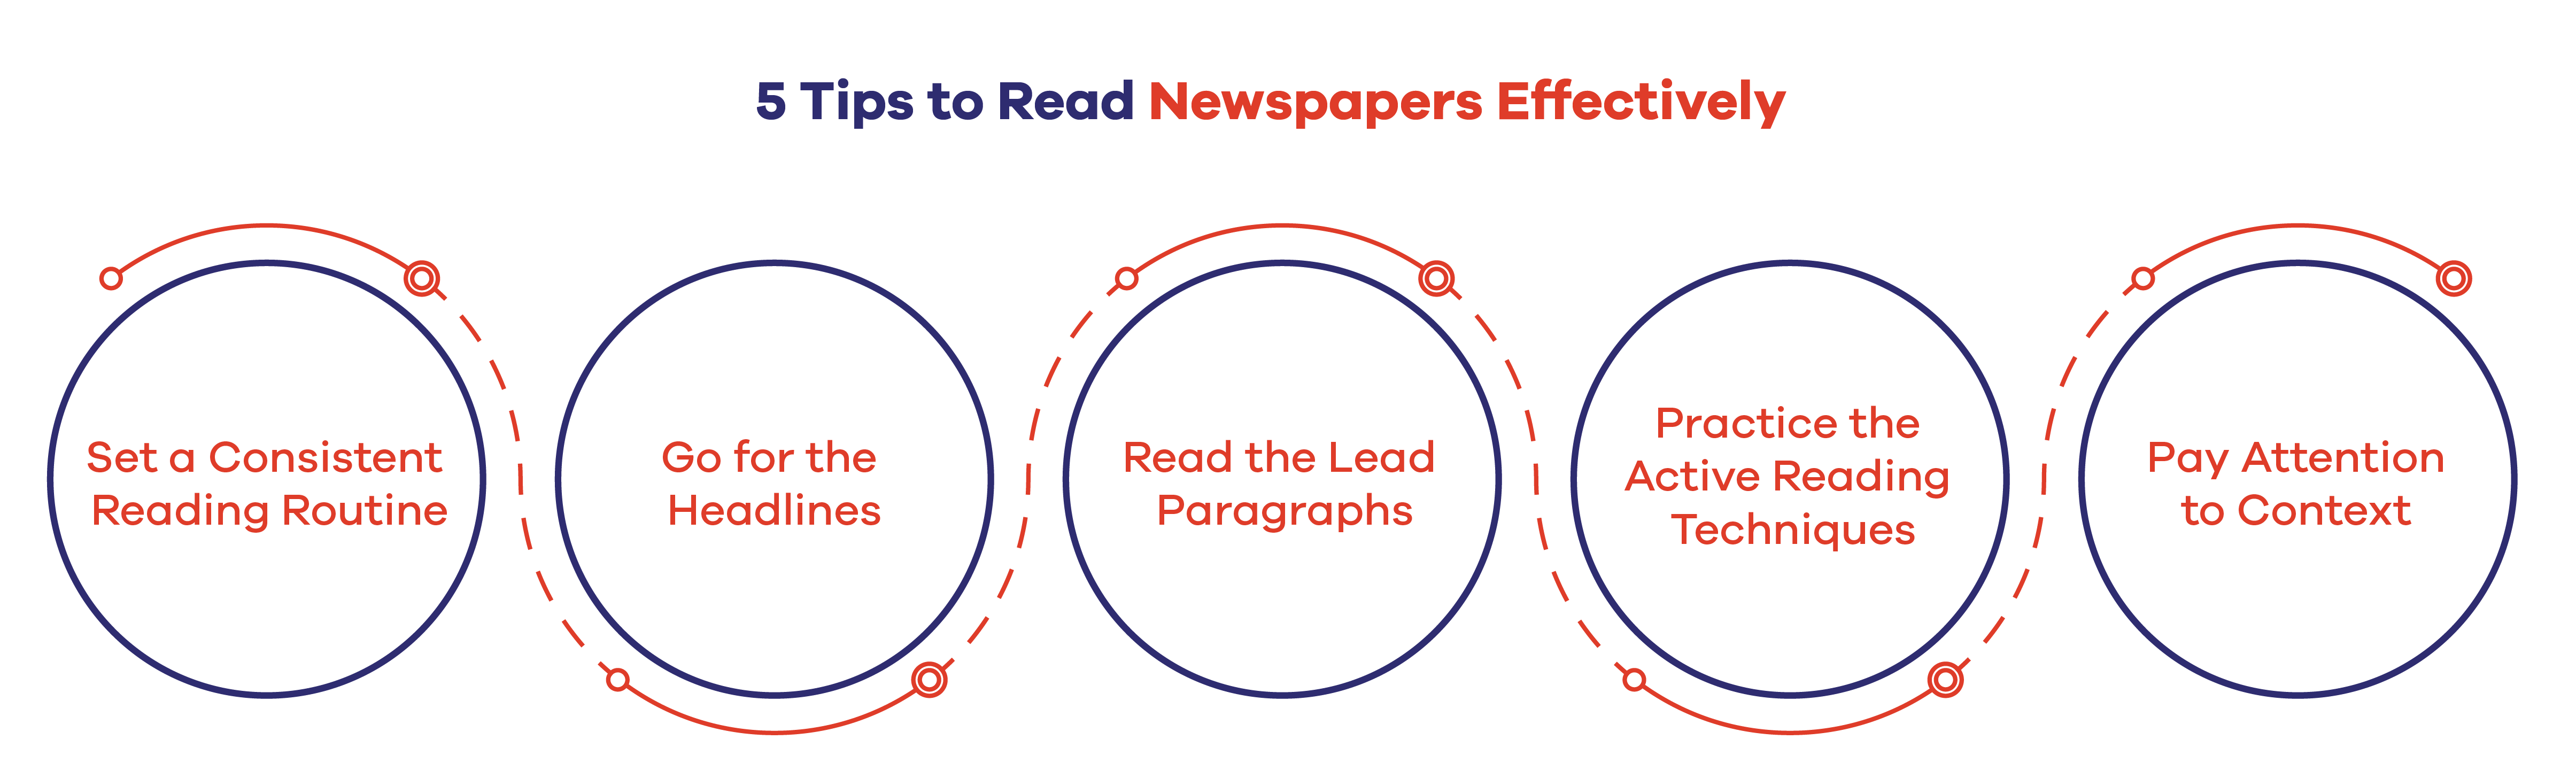 5 Tips to Read Newspapers Effectively 